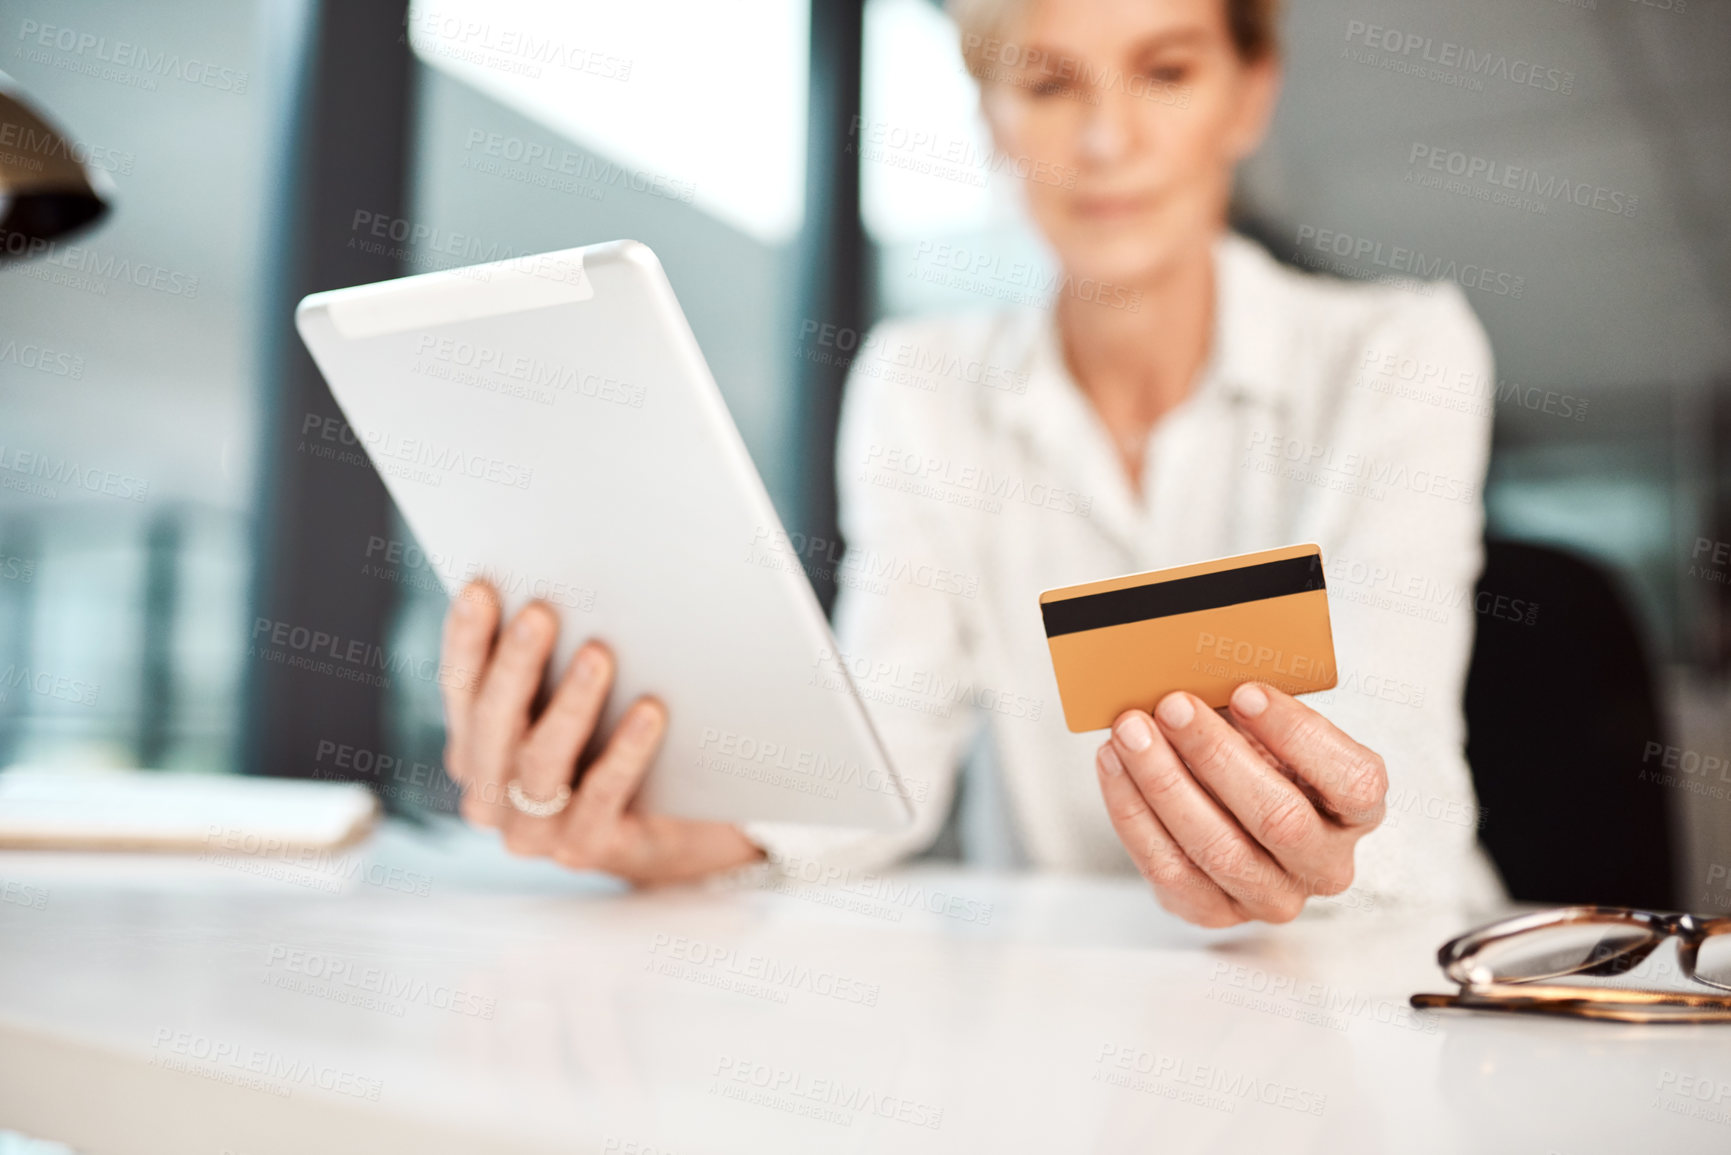 Buy stock photo Closeup shot of an unrecognisable businesswoman using a digital tablet and credit card in an office